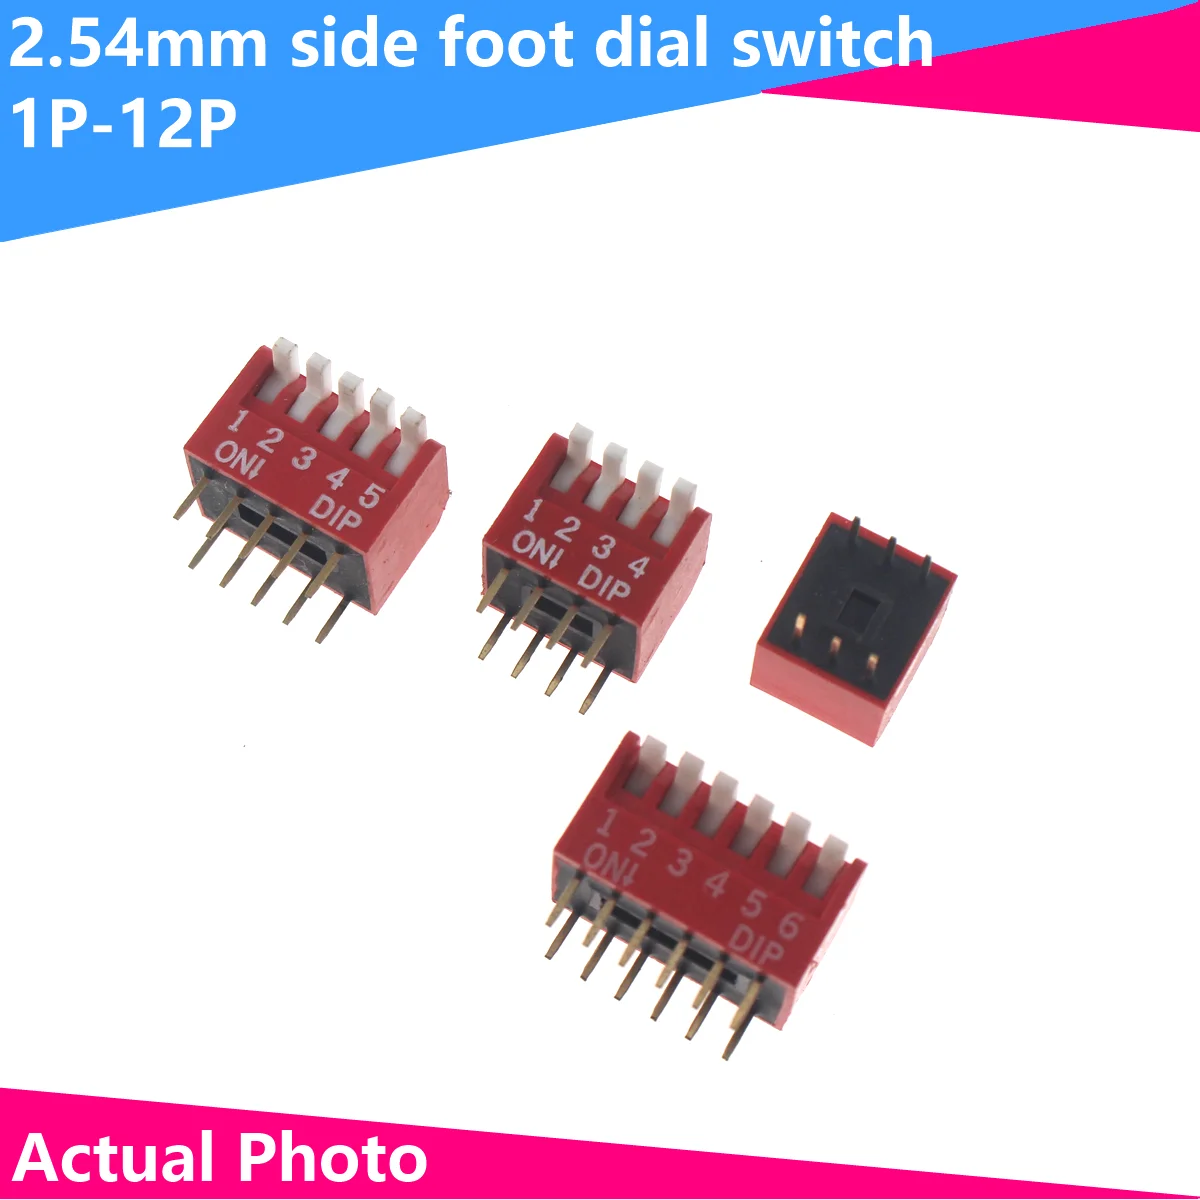 SMD Dial code switch 1.27/2.54mm feet pitch coding switch black 1.27 IC type patch thin KE-2P /3P /4P /5P /6P /8P /10P